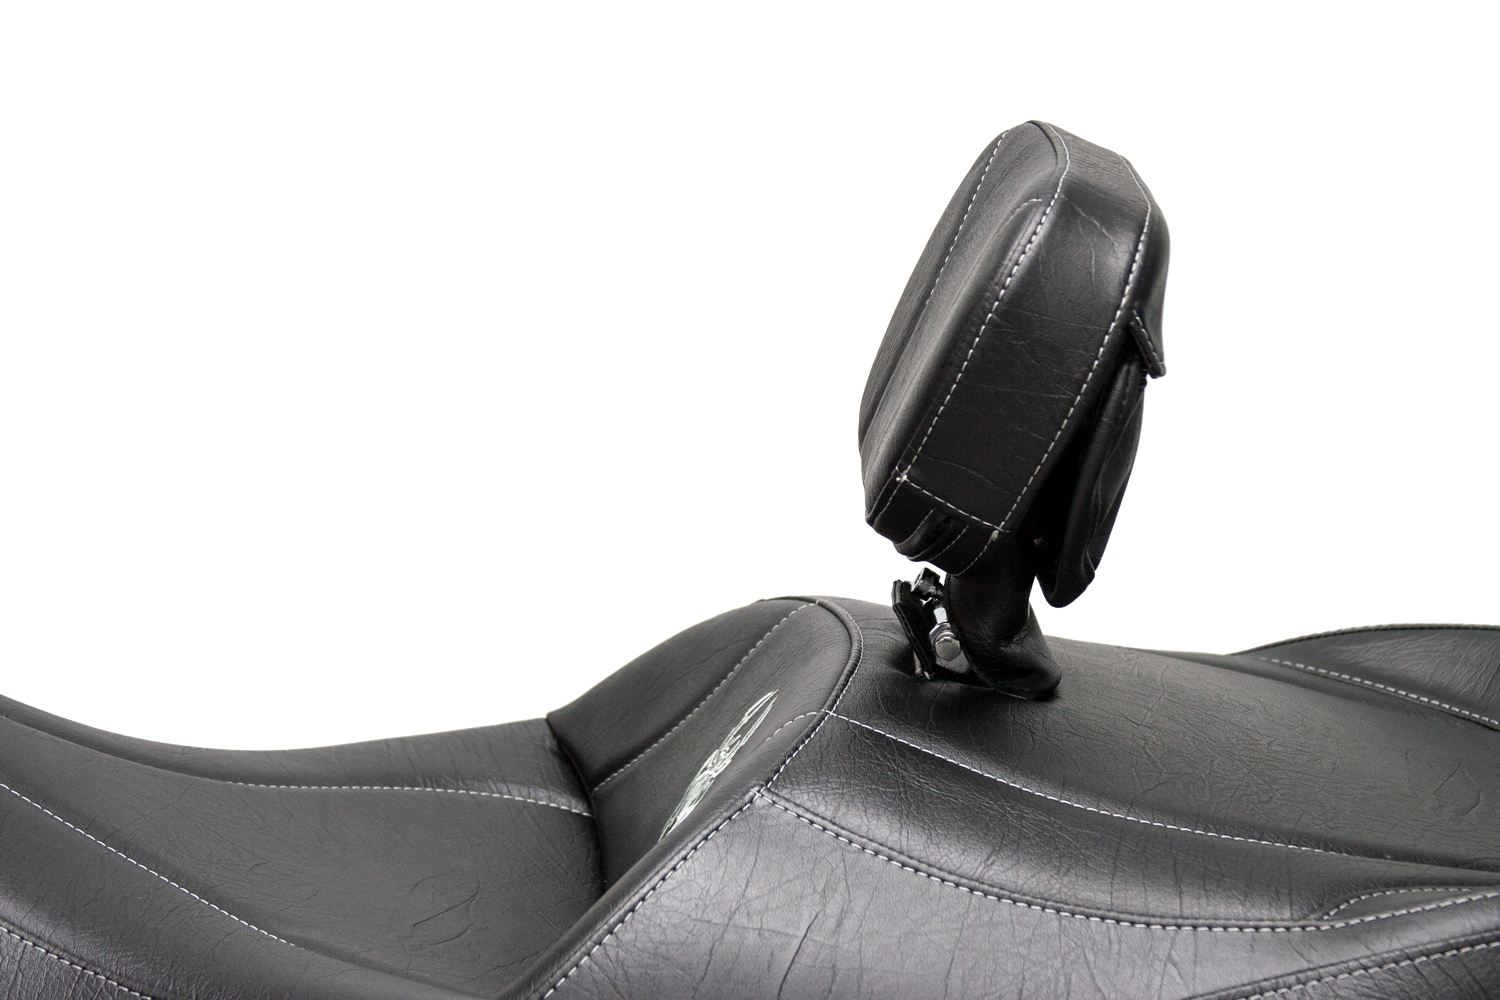 Spyder RT Seat and Driver Backrest (2010 - 2019)